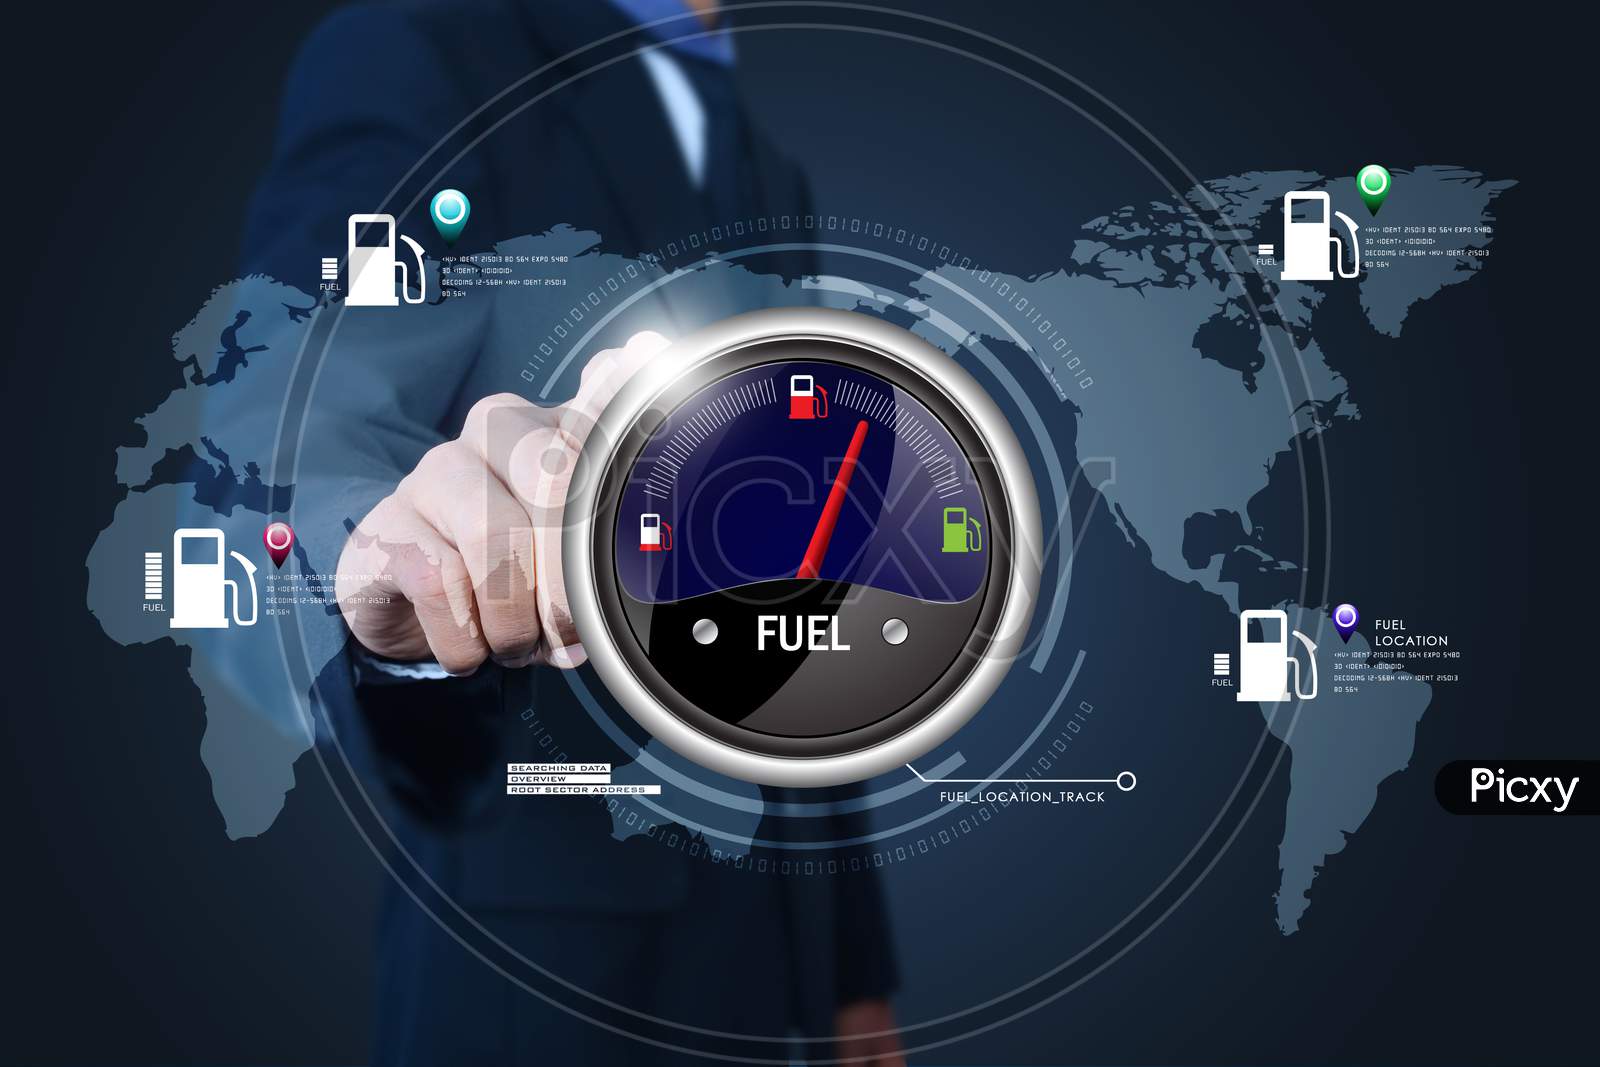 Close up shot of Person's Hand pointing towards a Fuel Indicator